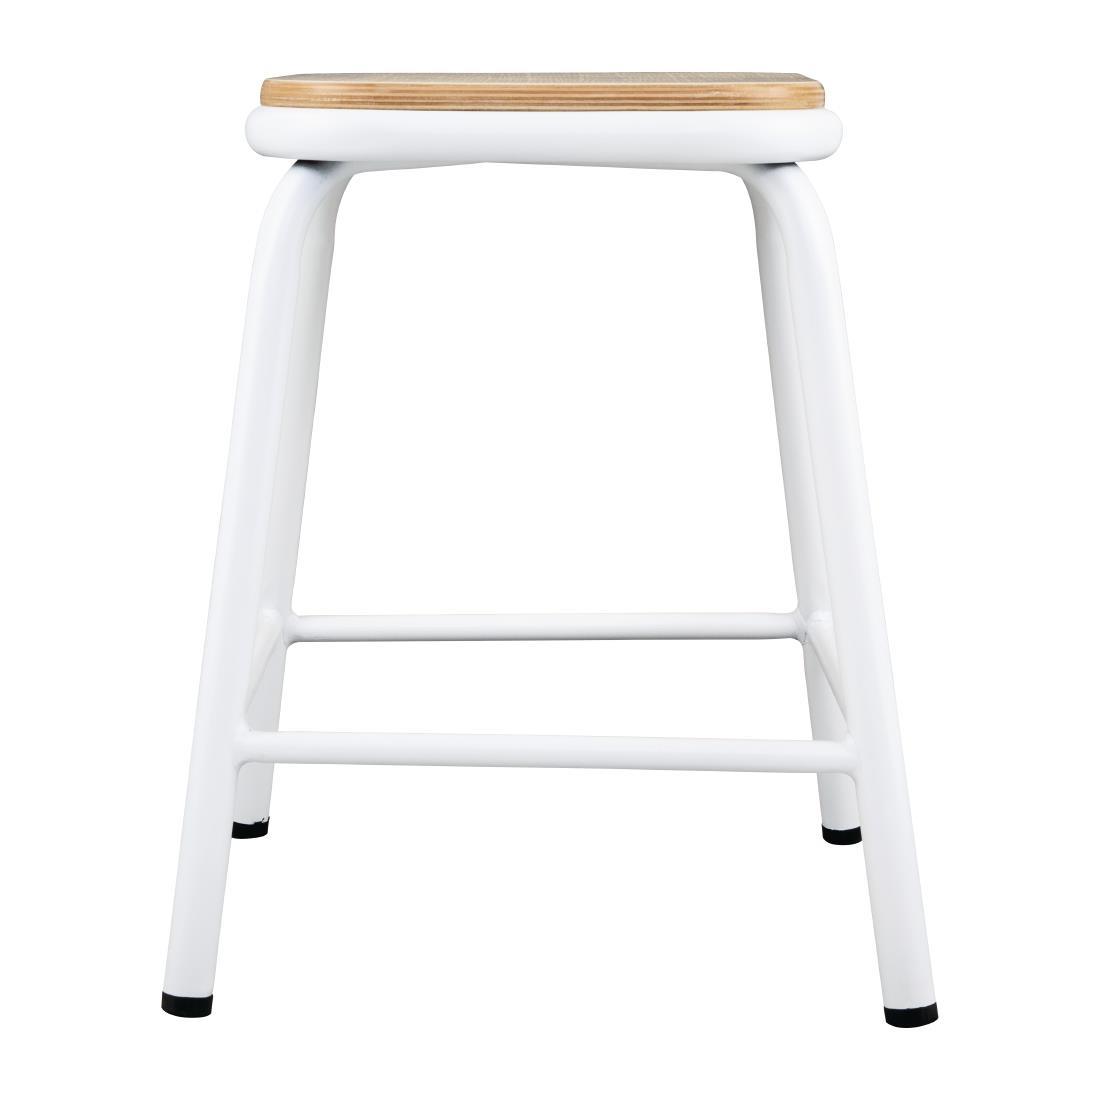 Bolero Cantina Low Stools with Wooden Seat Pad White (Pack of 4) - FB933  - 2